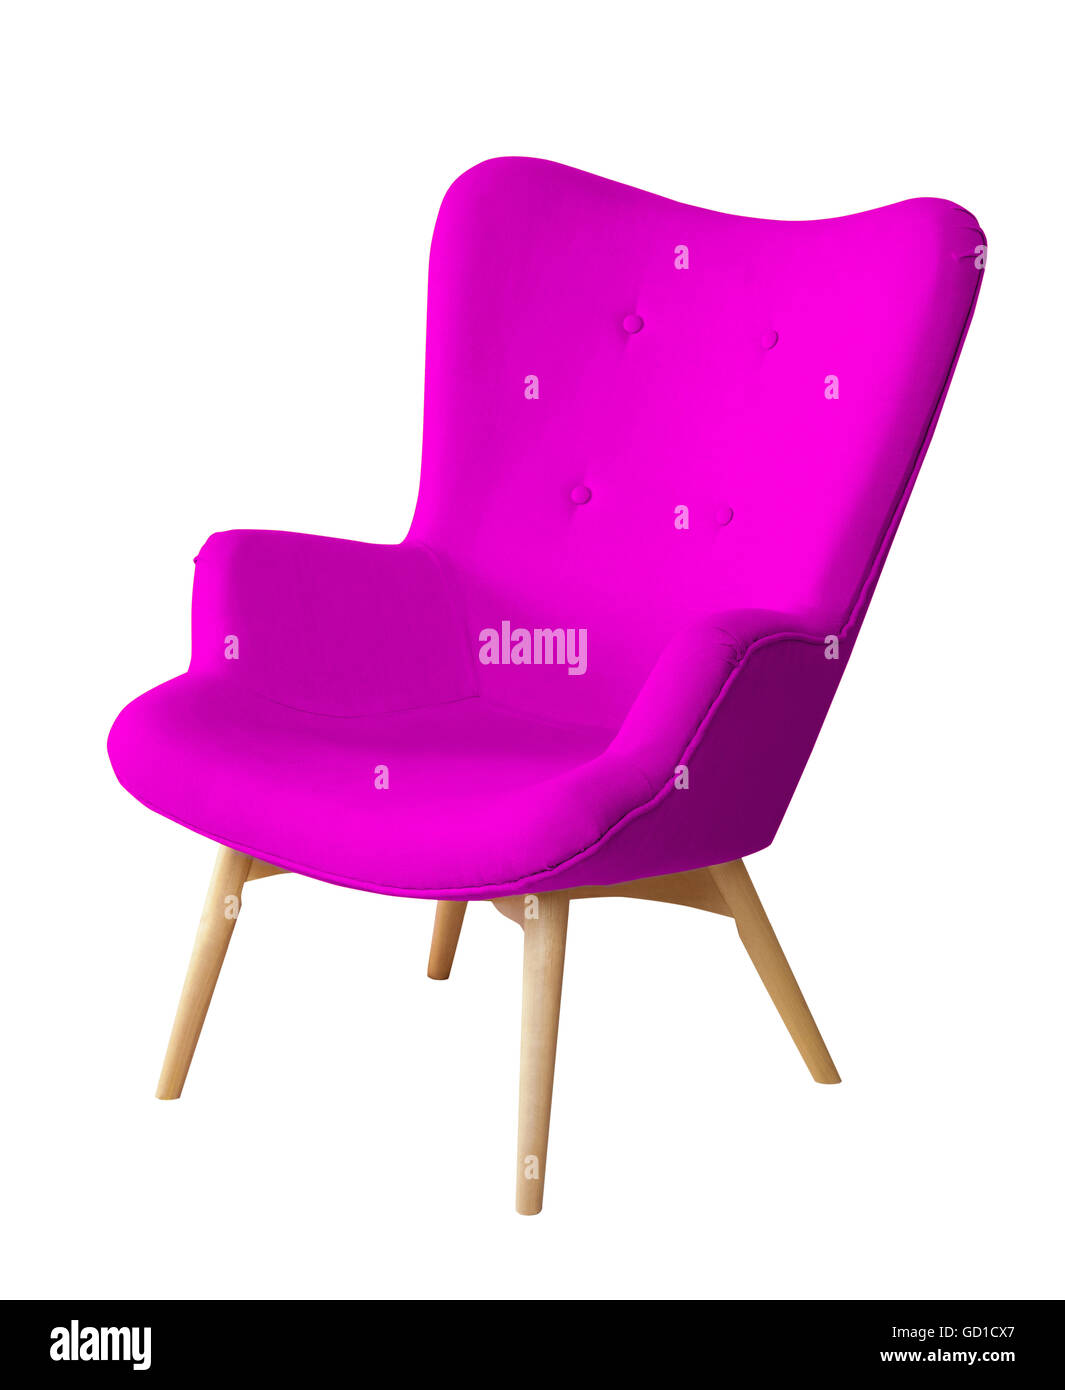 Purple color chair isolated Stock Photo